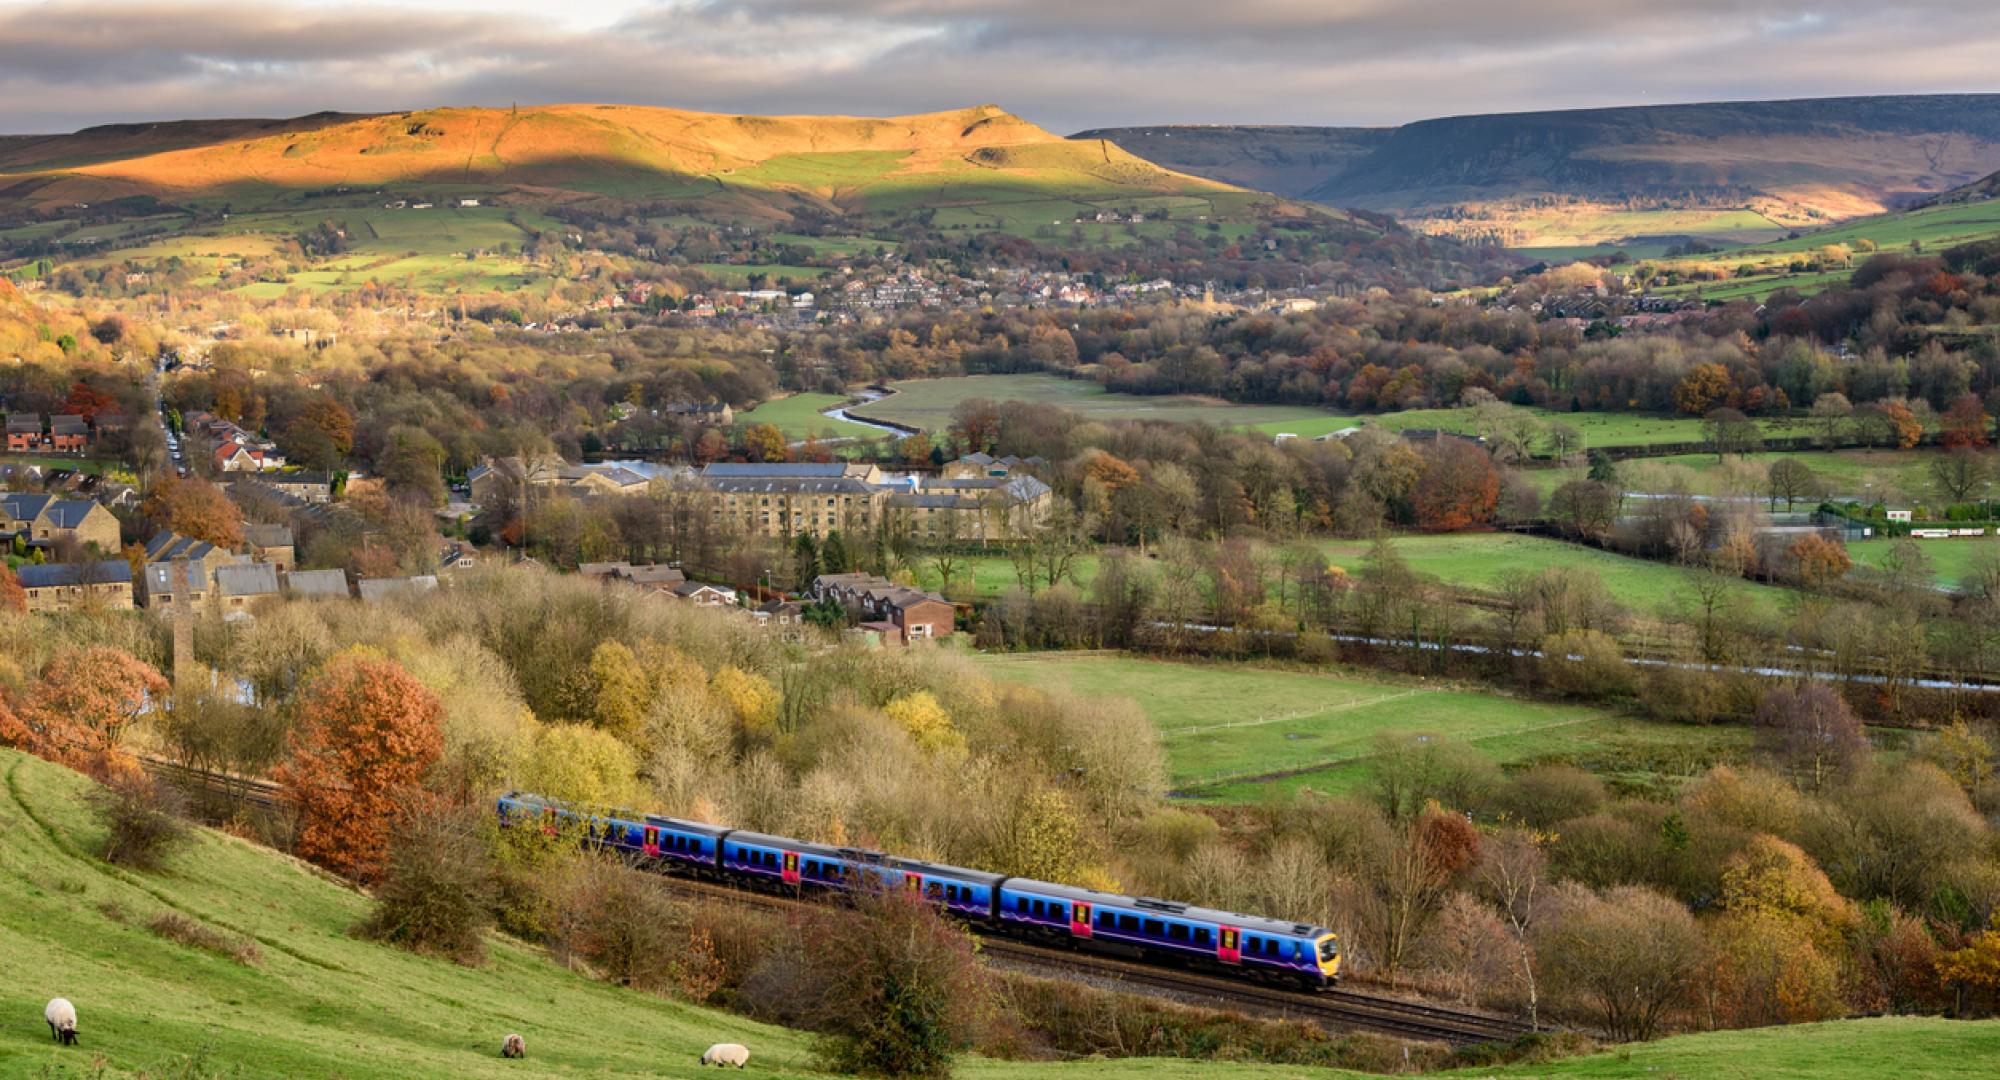 Passanger train passing through british countryside near greater Manchester, England.